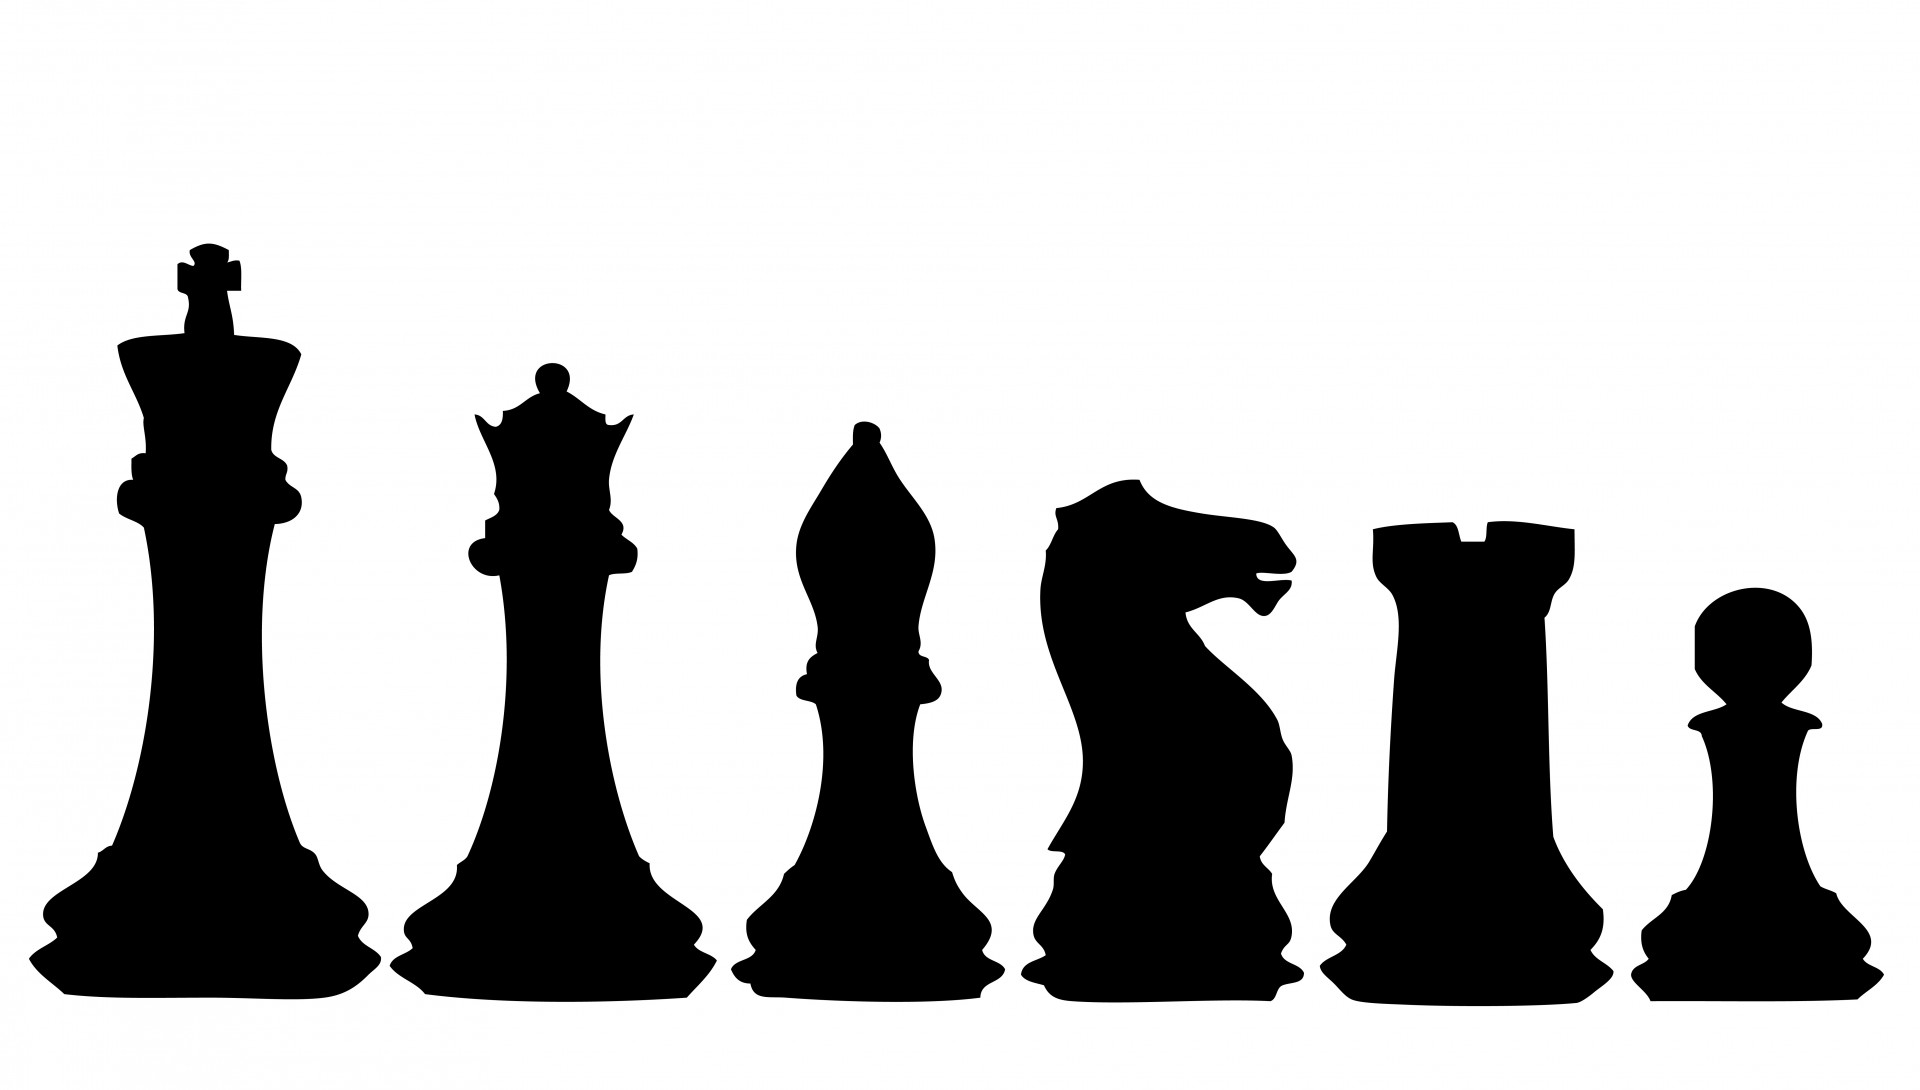 play chess clipart - photo #24